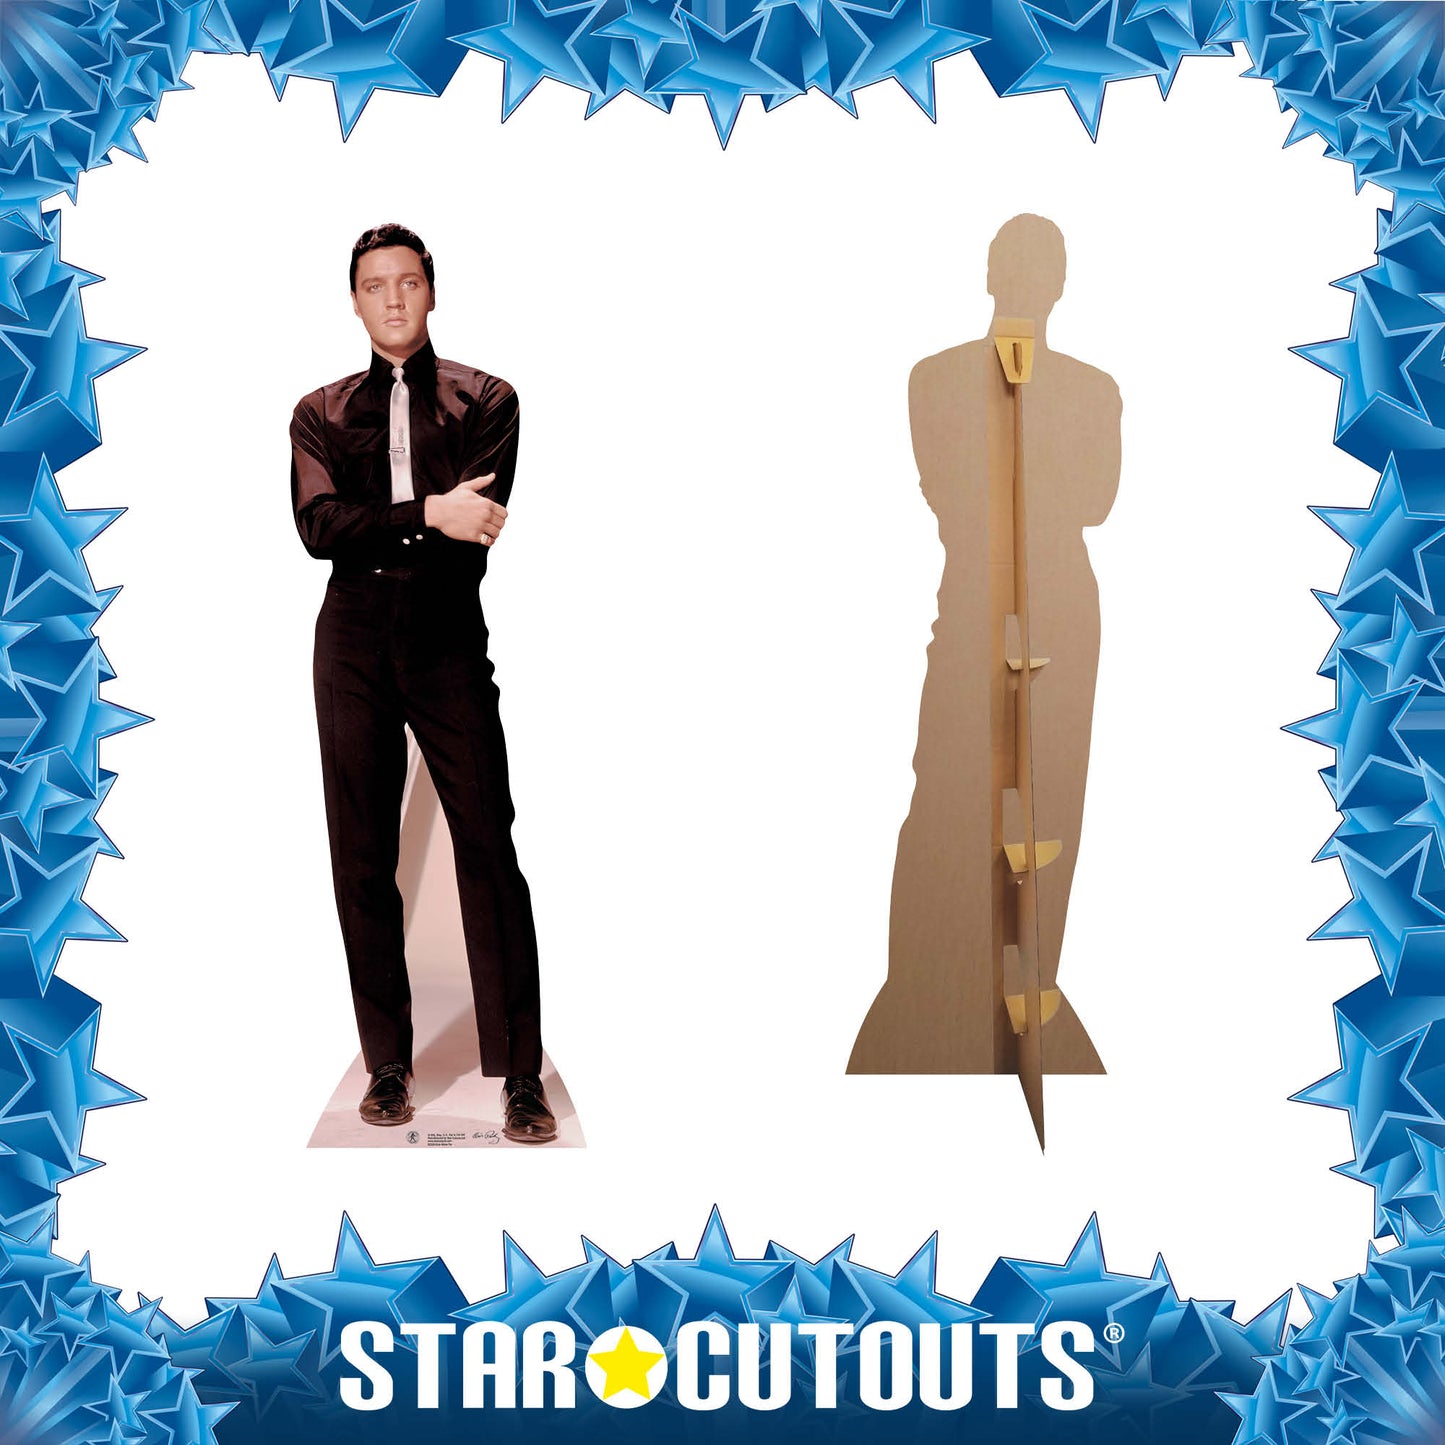 SC228 Elvis in Black Suit and White Tie Cardboard Cut Out Height 182cm